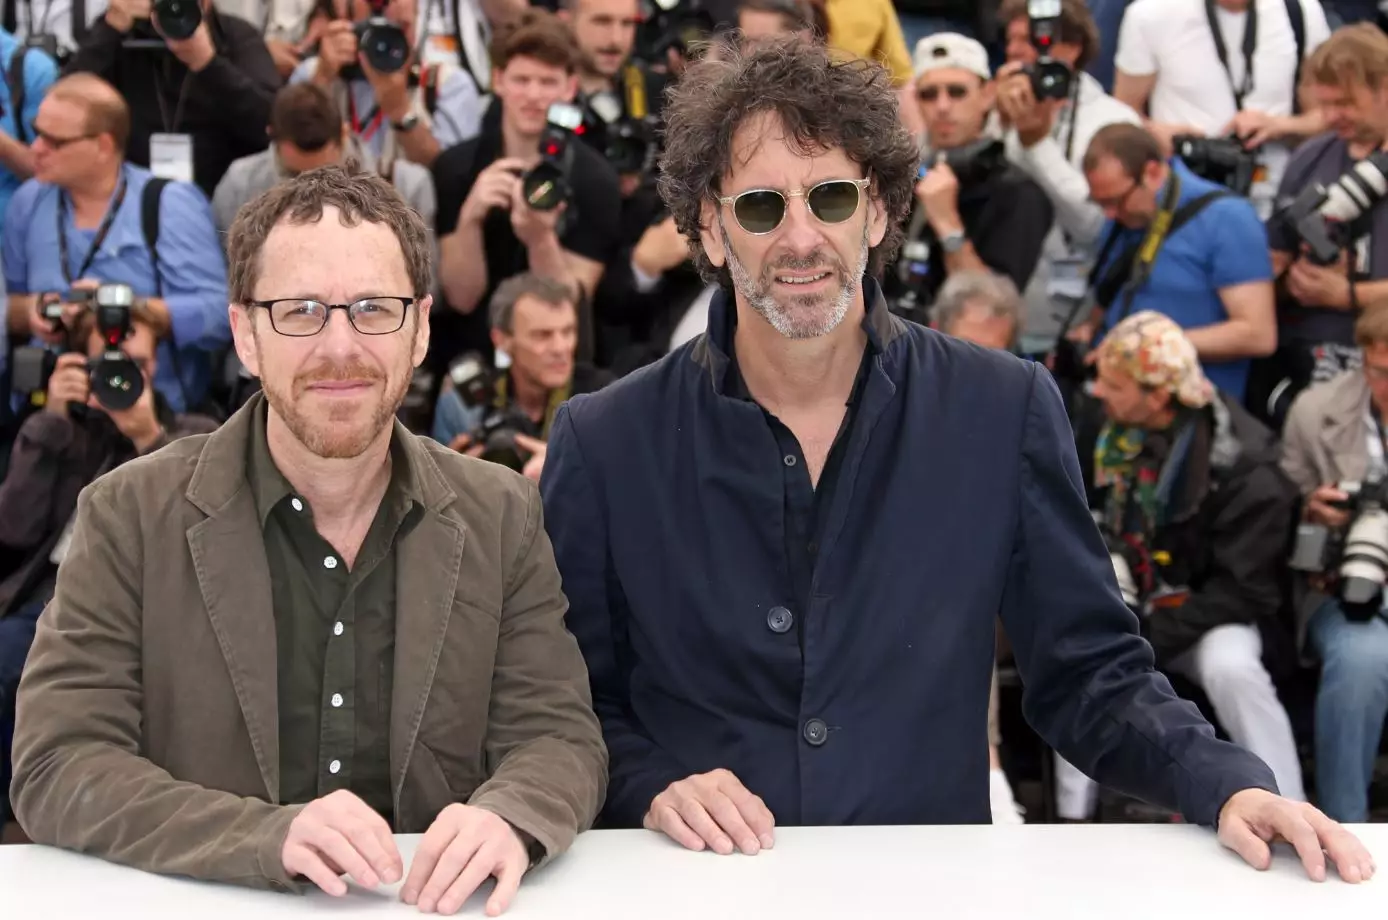 Coen Brothers Set To Direct Film About The Dark Web